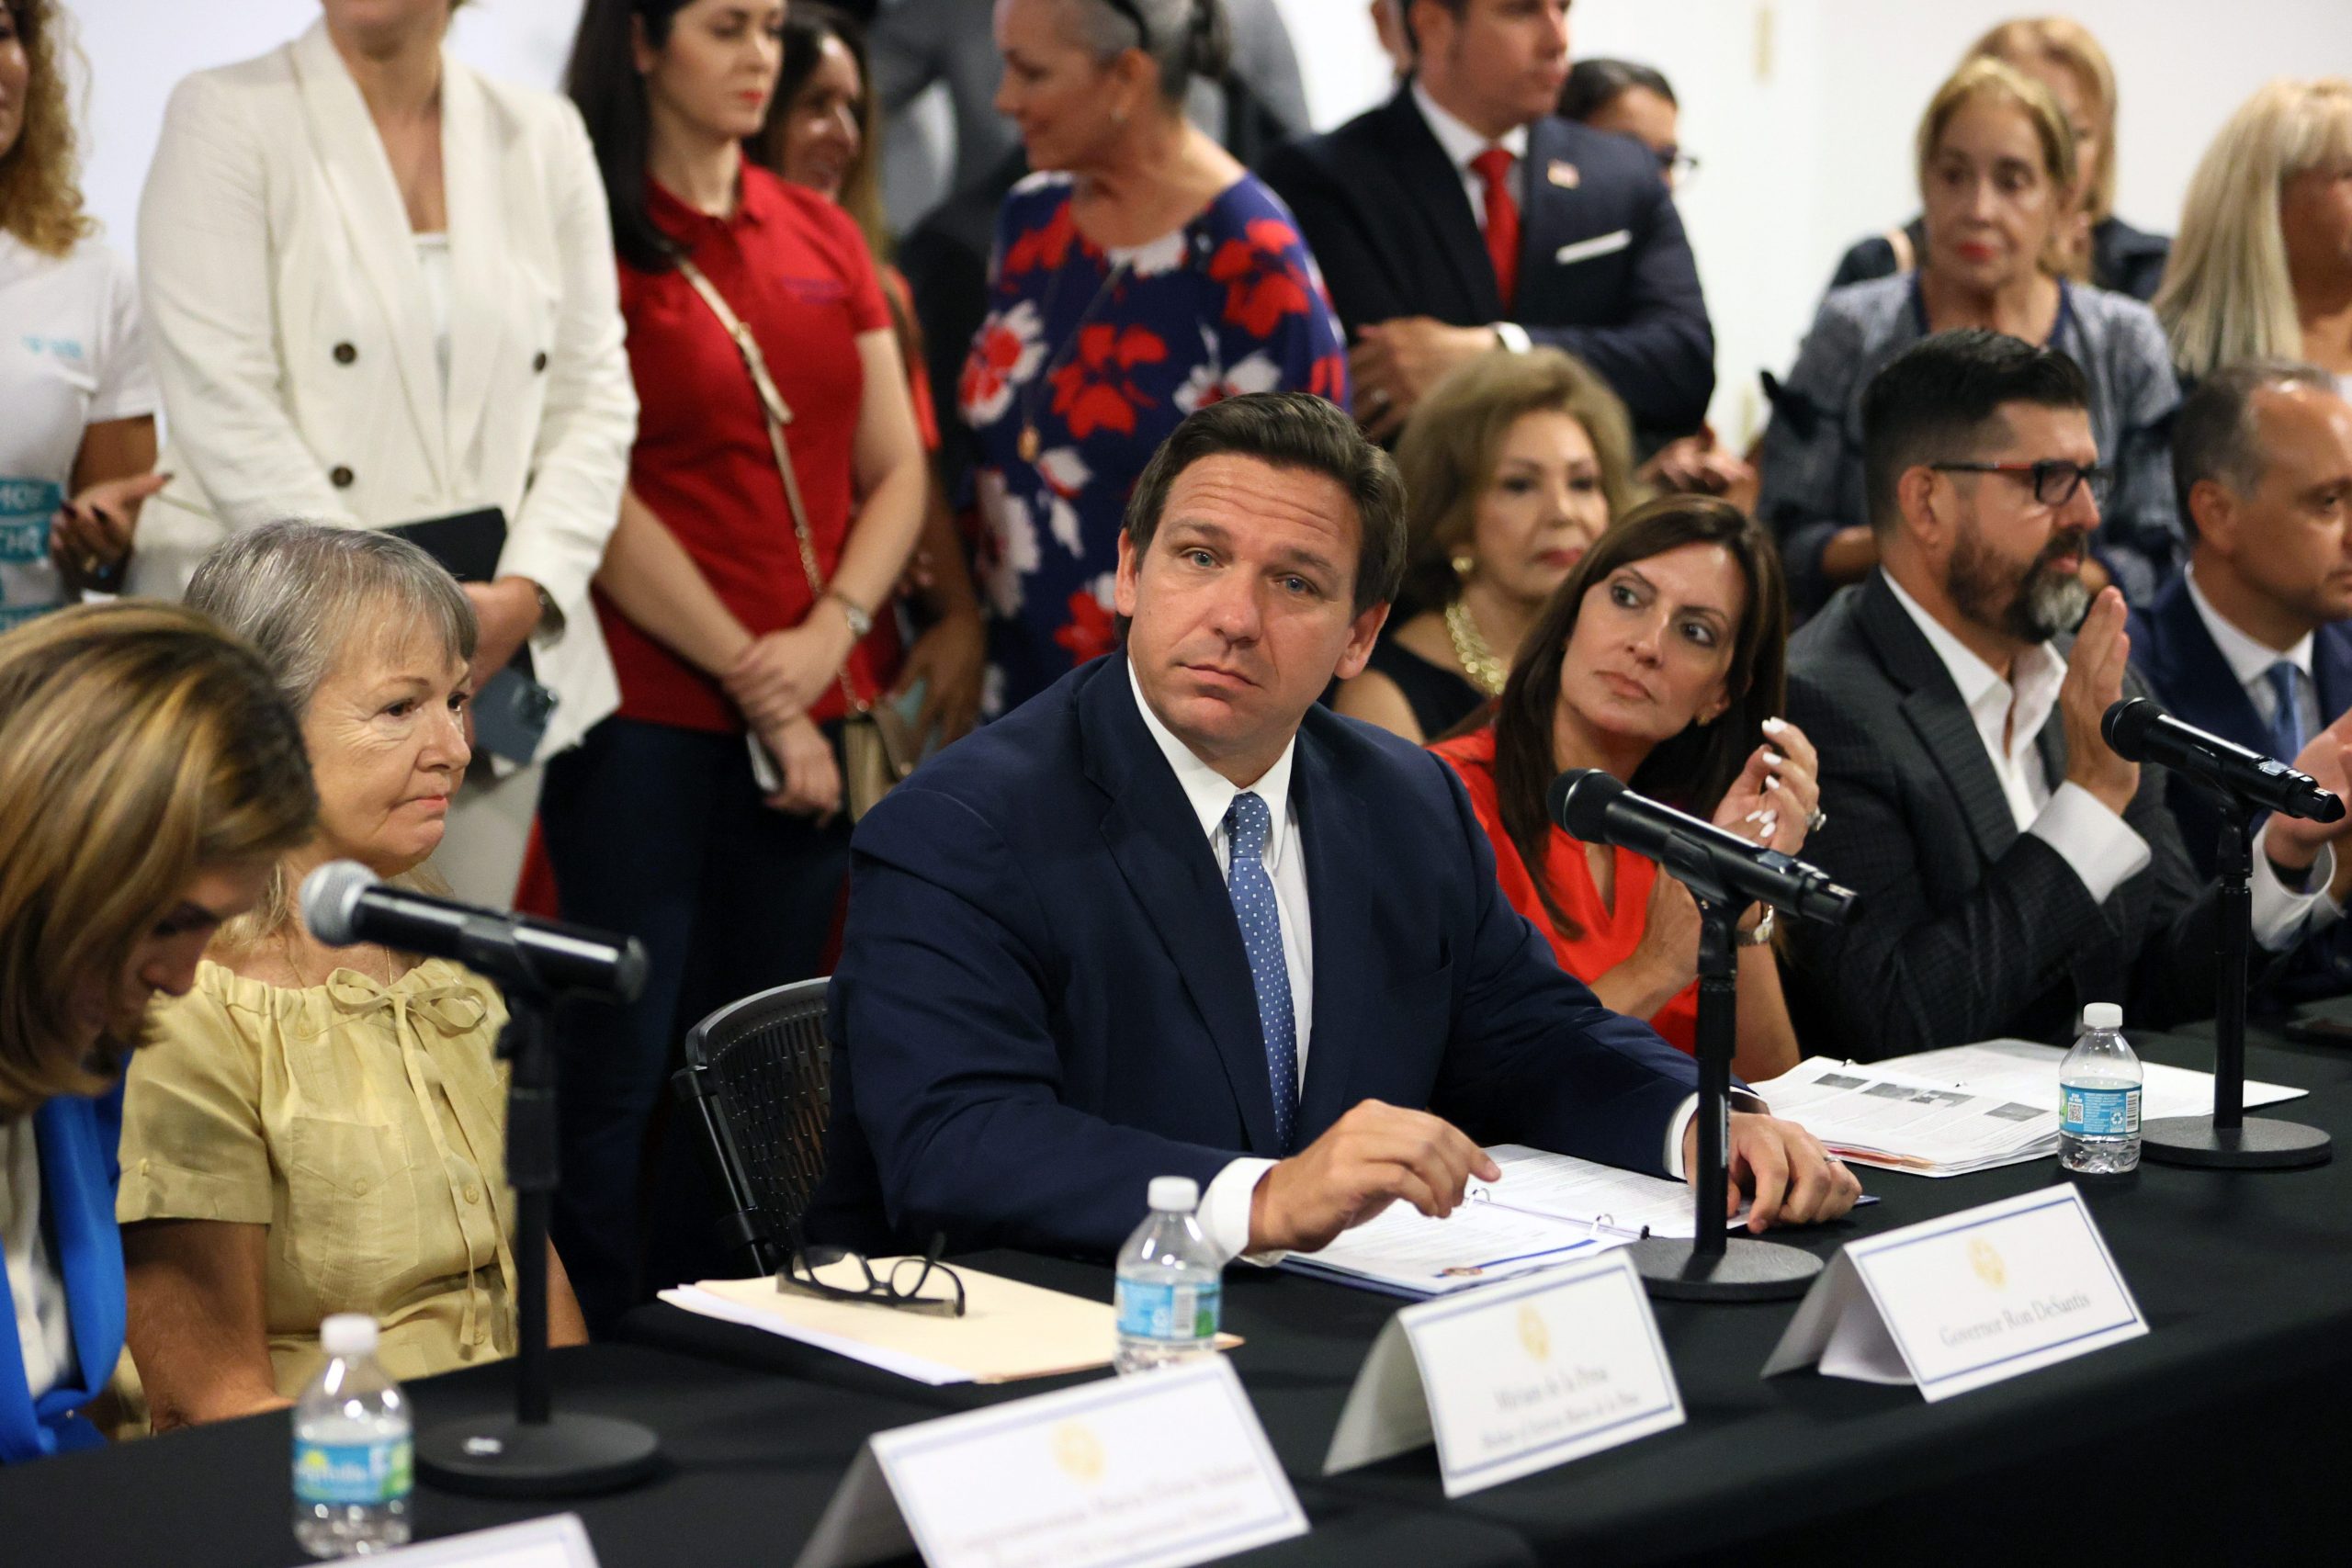 Florida Governor Ron DeSantis sits at a table wearing a black suit with a blue tie surrounded by people.